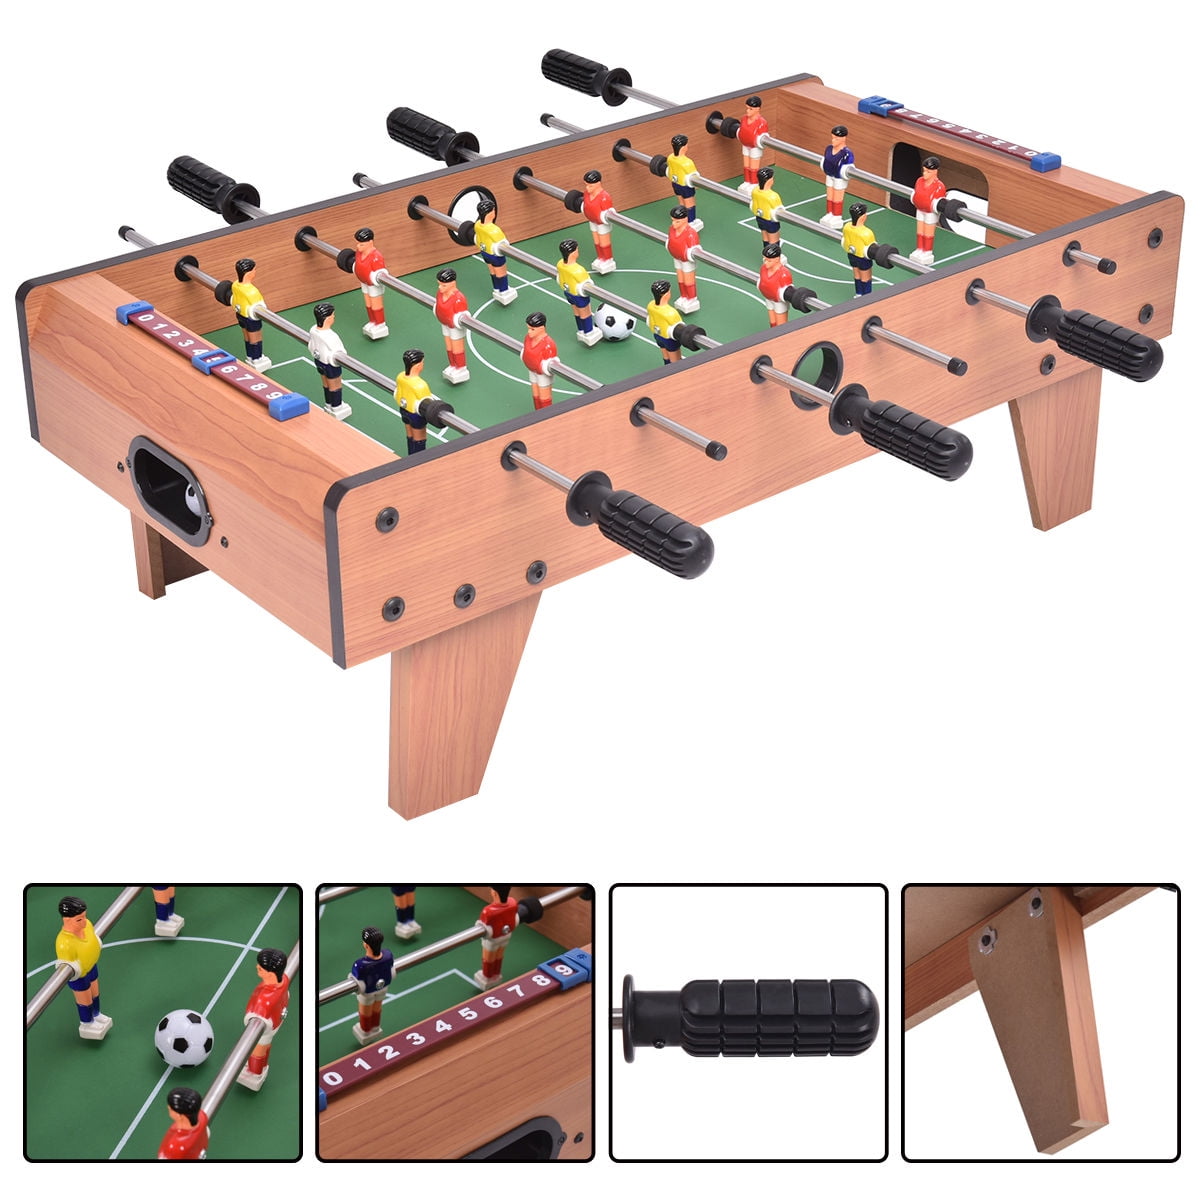 Details about   40" Foosball Table Competition Game Soccer Arcade Sized Football Sports Indoor 